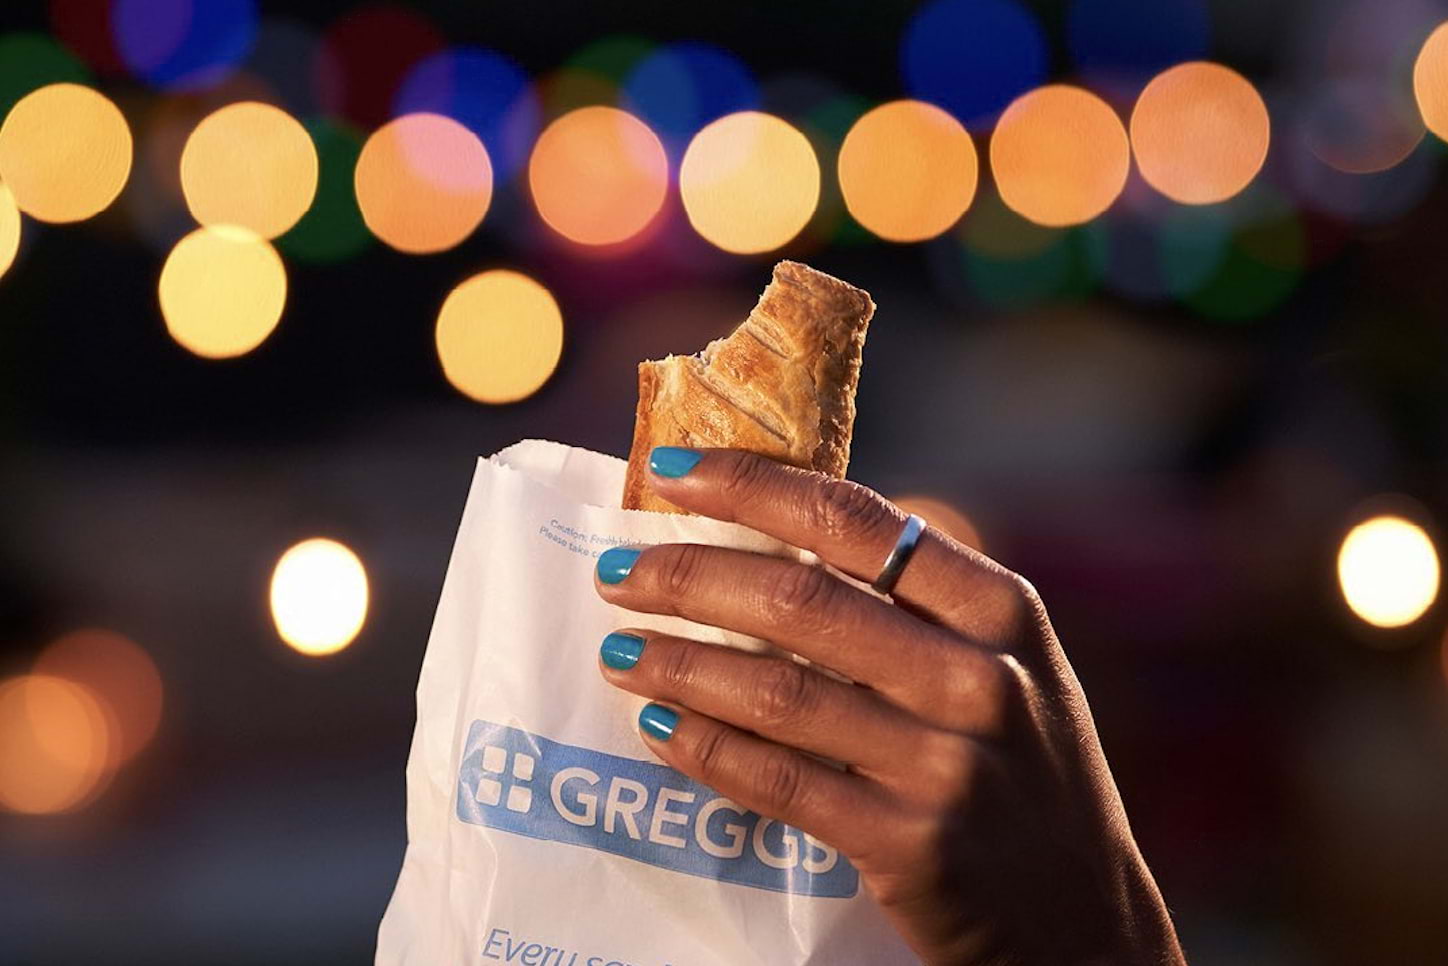 The Greggs Festive Bake is back and they're celebrating with a Greggs-themed brunch